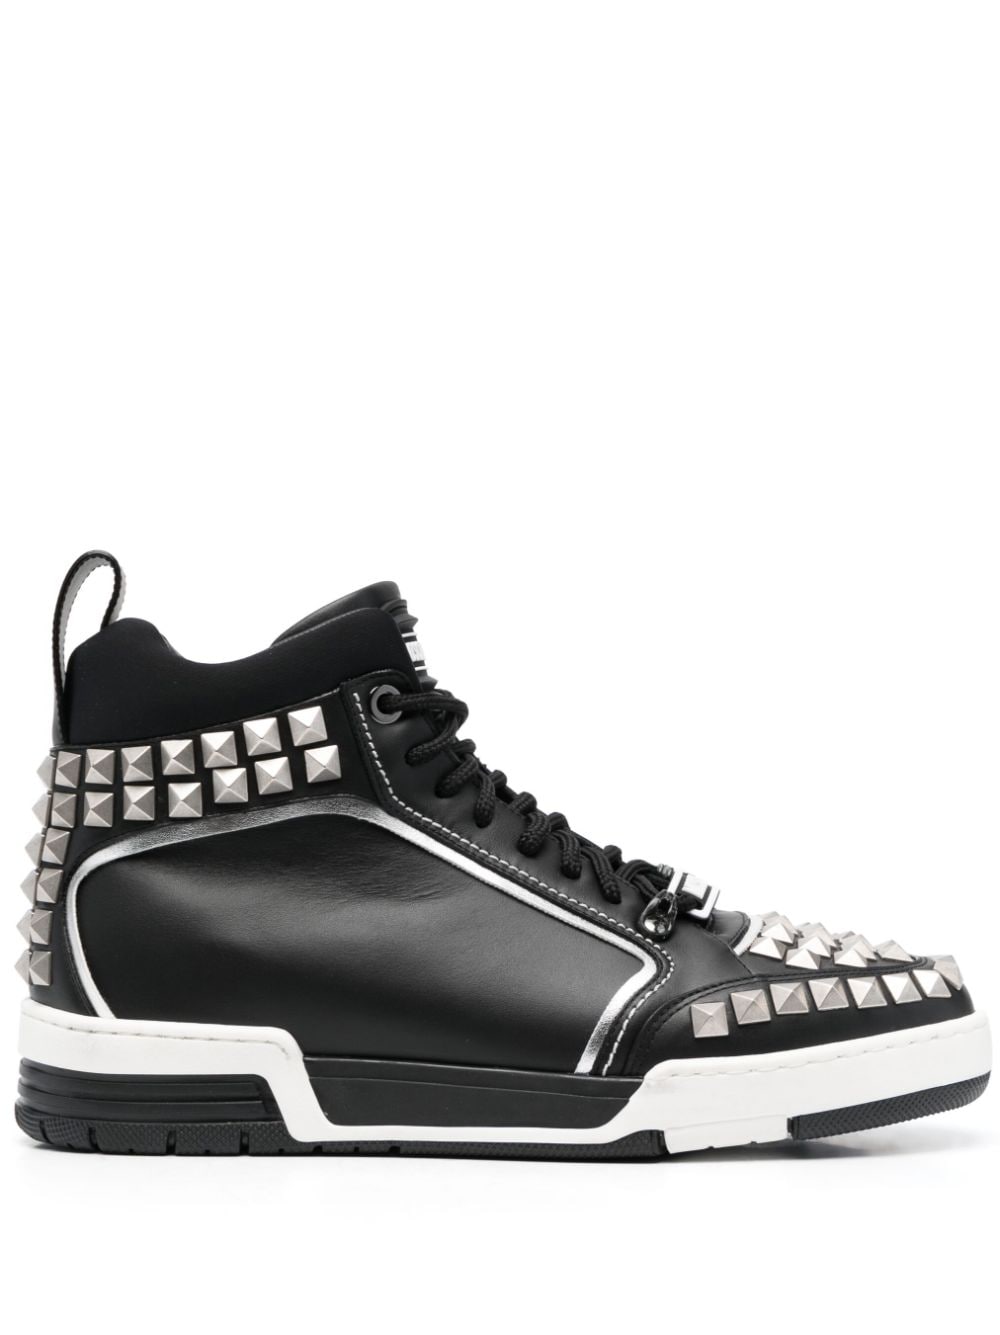 Moschino stud-embellished high-top sneakers - Black